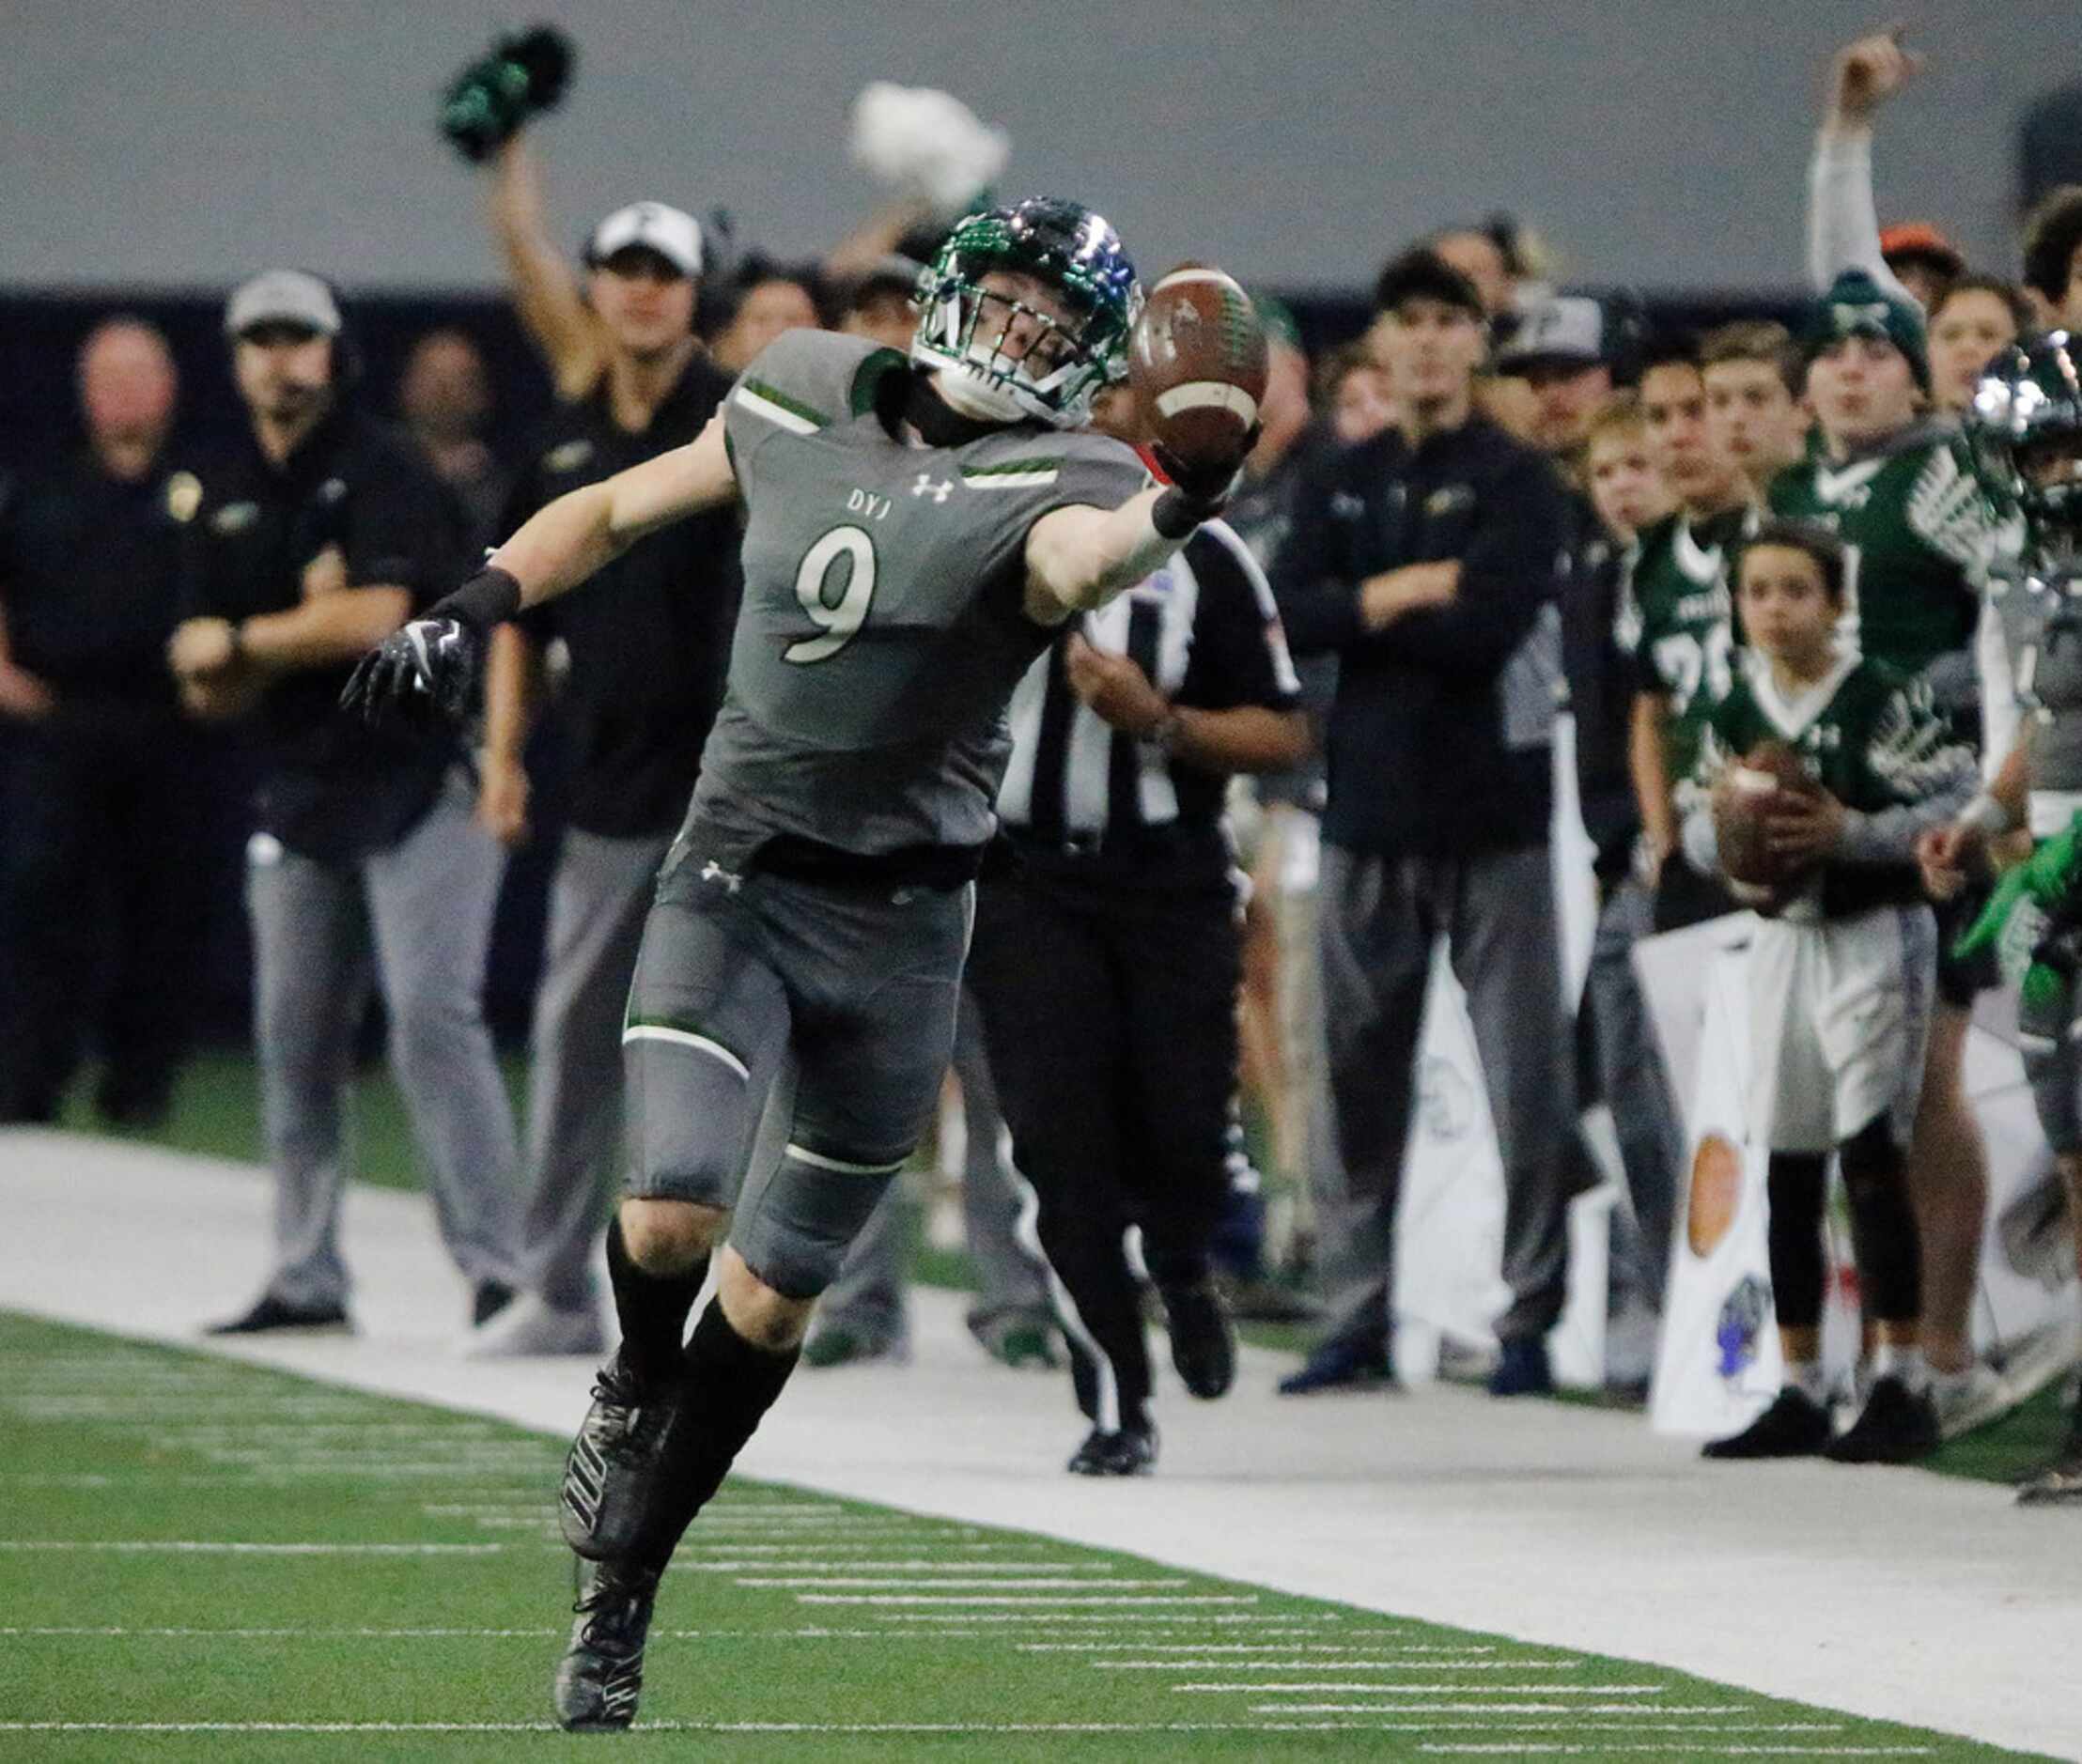 Prosper High School tight end Cameron Harpole (9) was unable to bring this pass as he was...